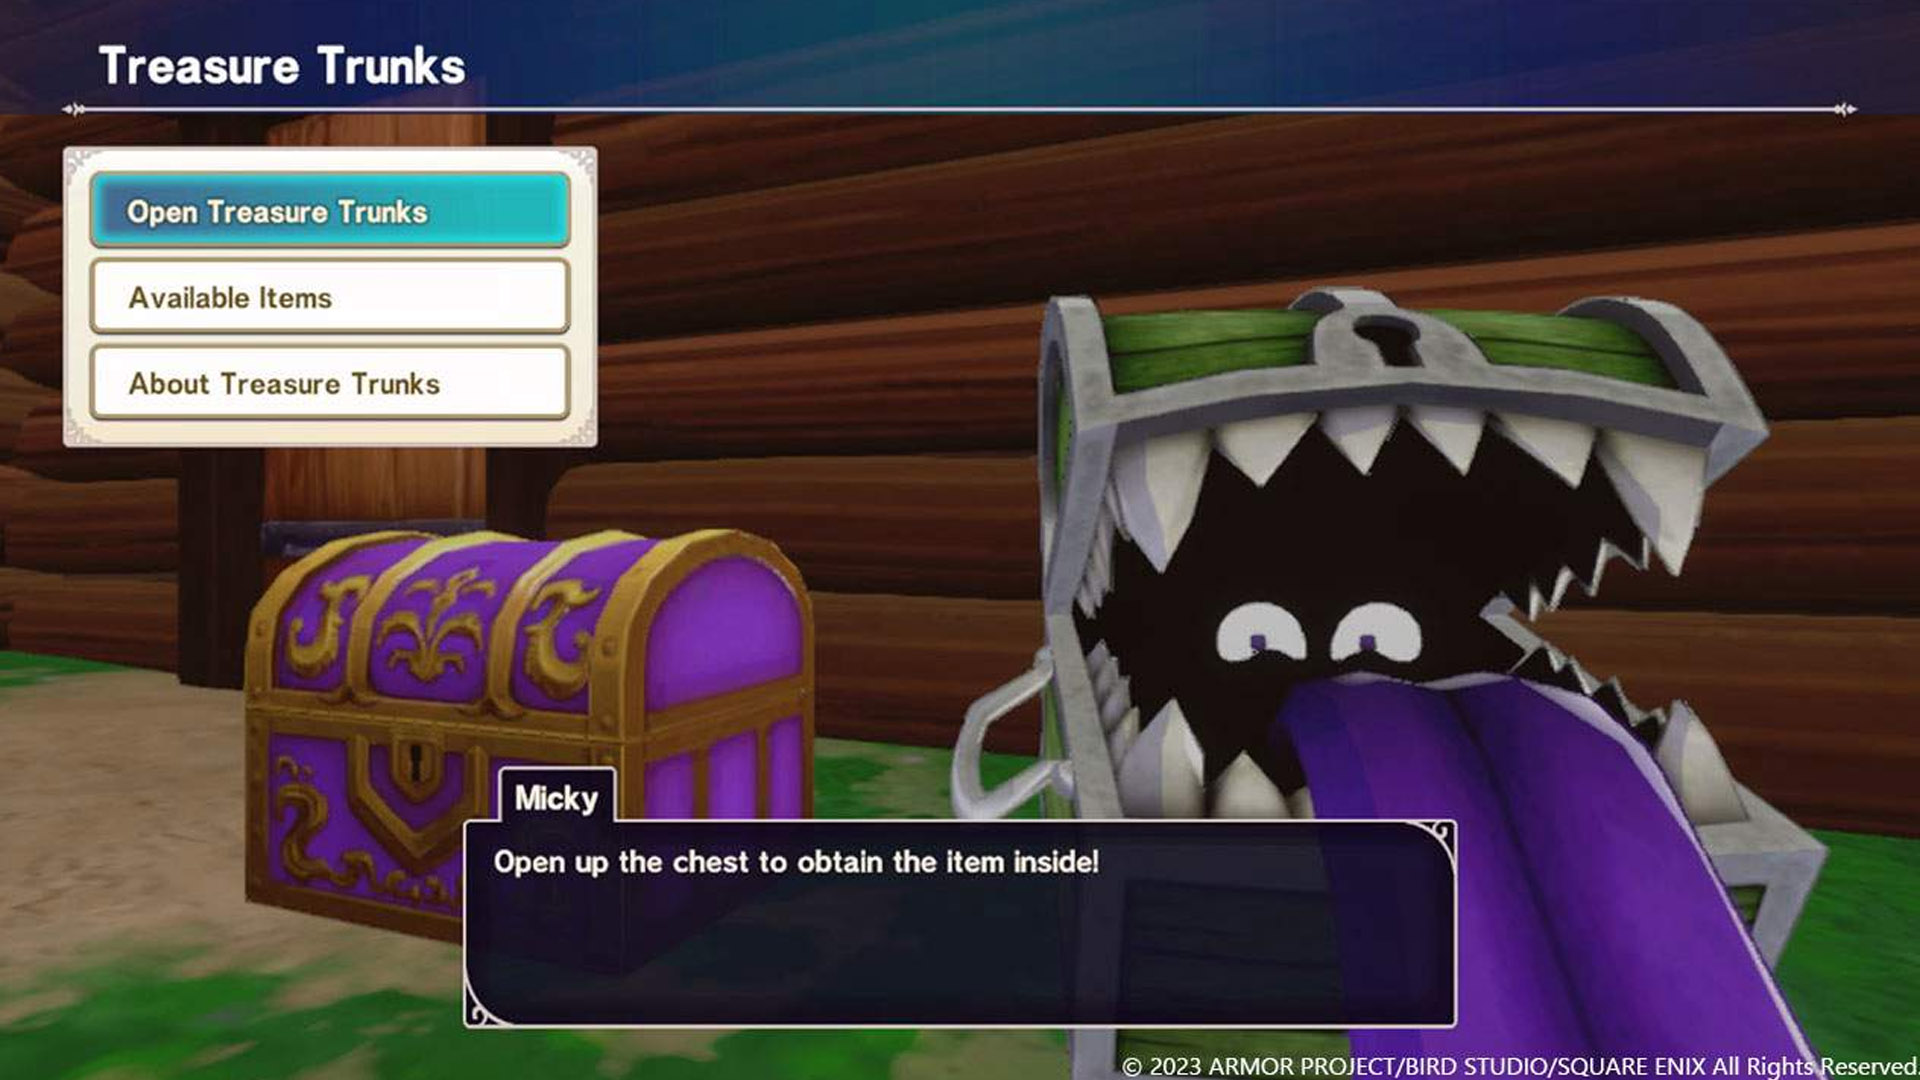 Dragon Quest Monsters: The Dark Prince details new battle and monster  recruiting systems - Gematsu